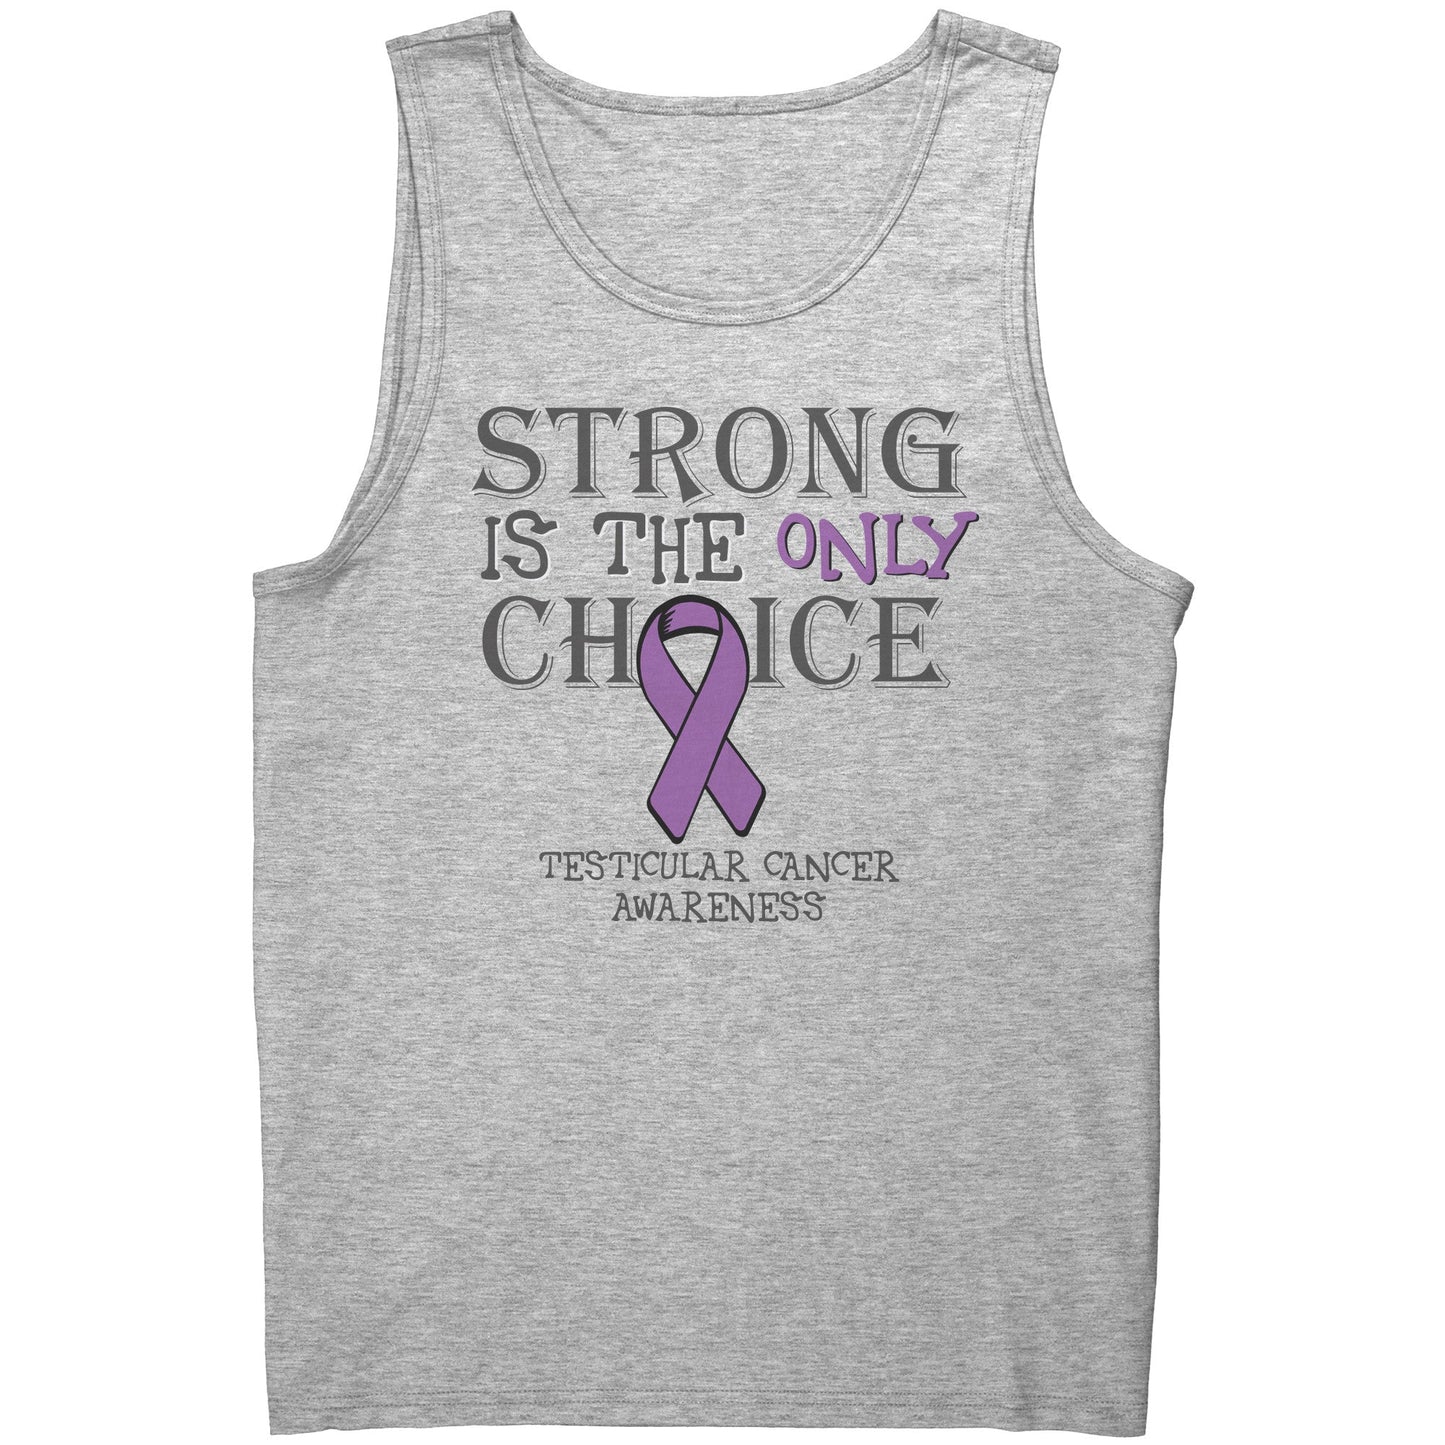 Strong is the Only Choice -Testicular Cancer Awareness T-Shirt, Hoodie, Tank |x|